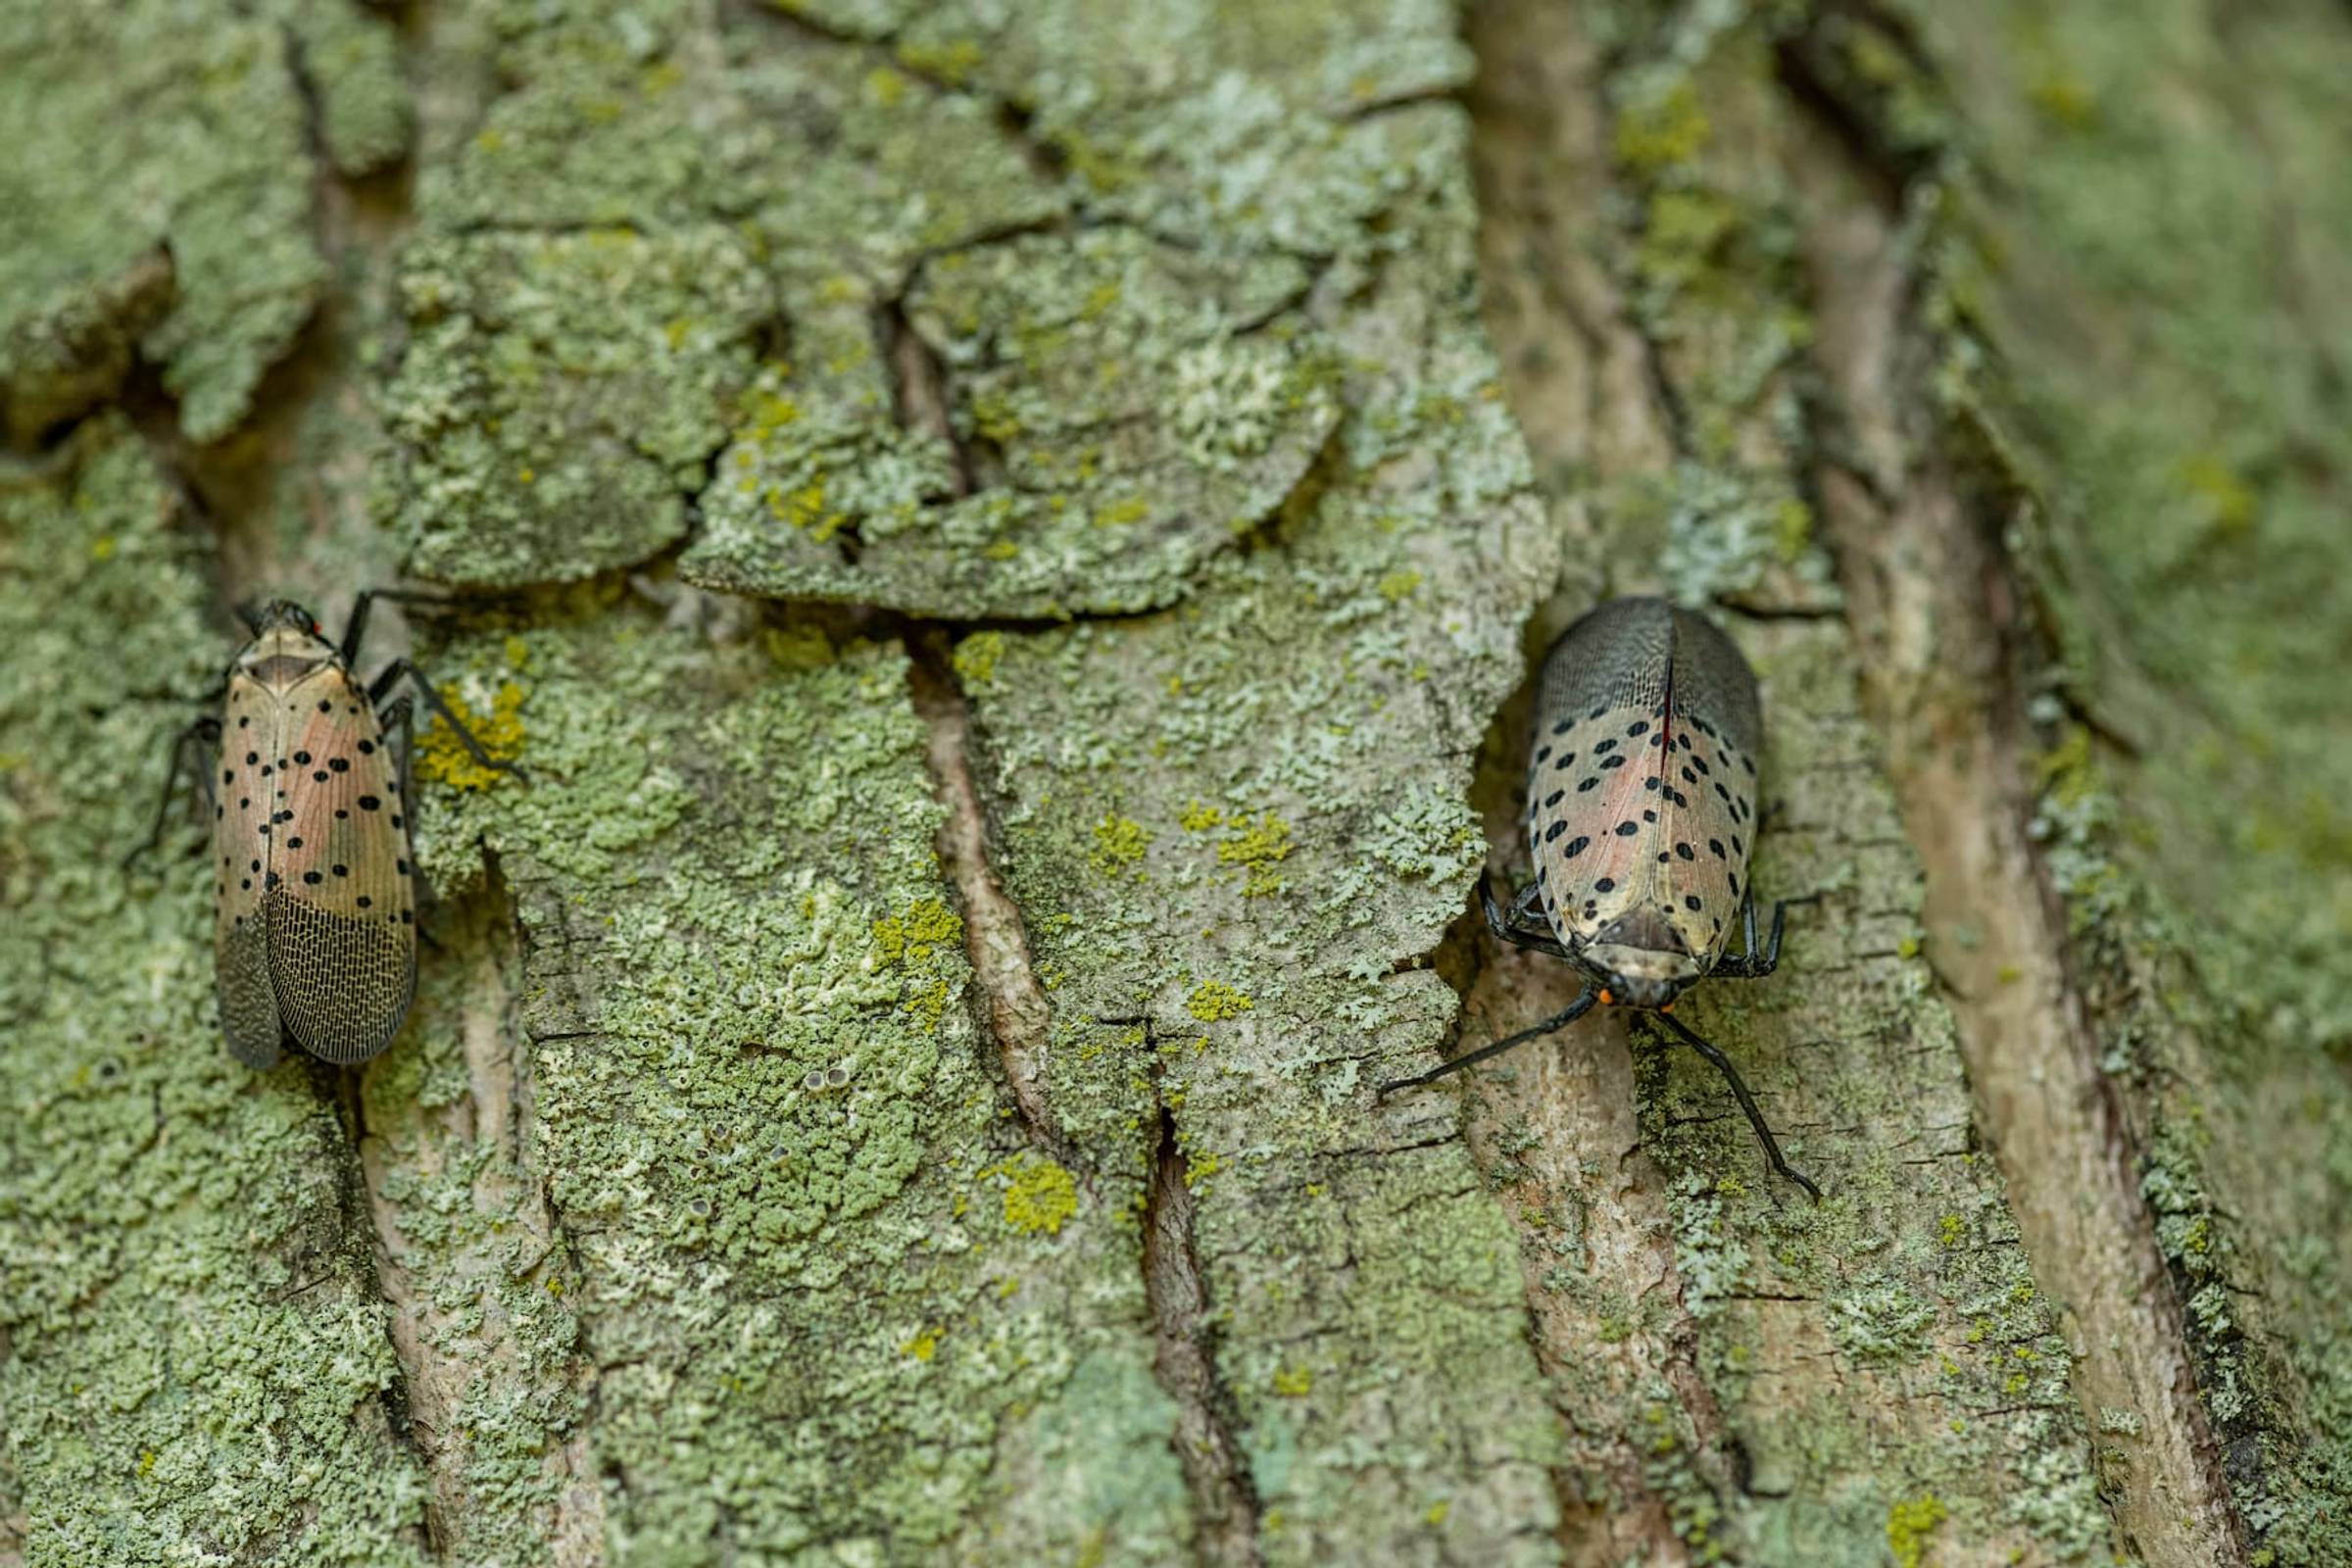 Spotted Lanternfly Treatment & Extermination in NYC